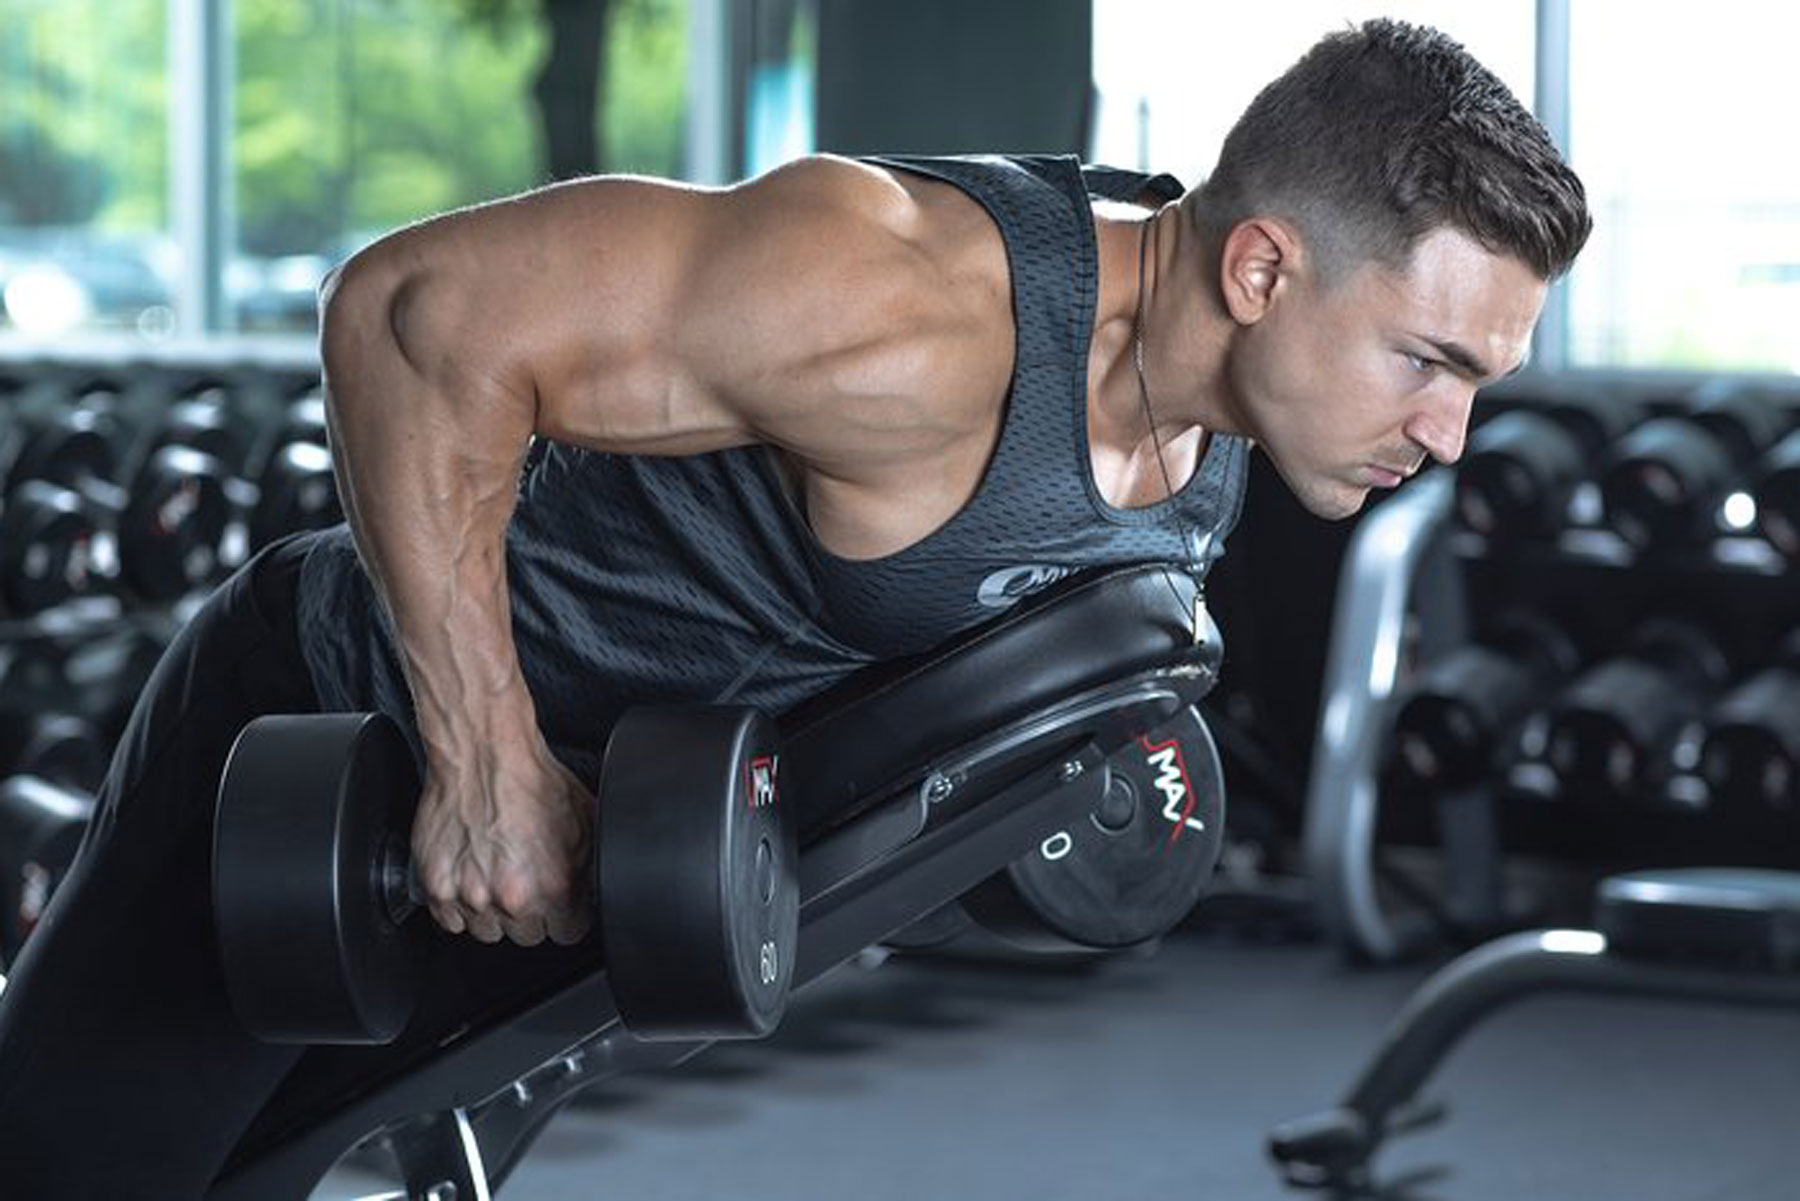 back workouts with dumbbells